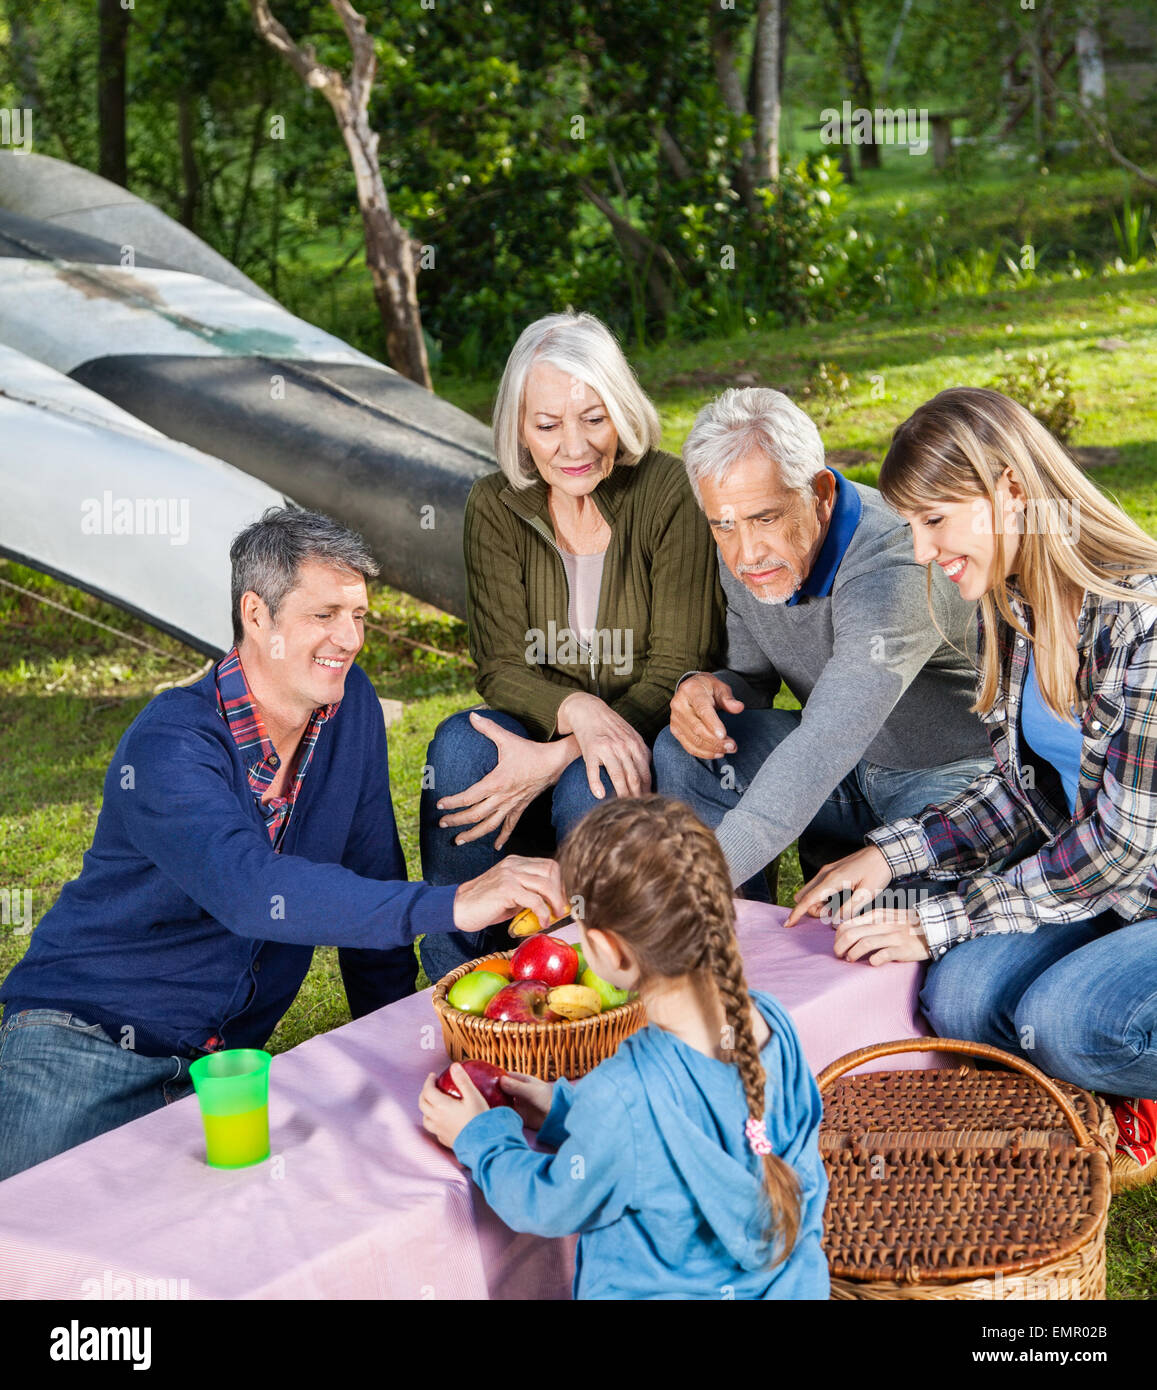 Family Having Fruits At Campsite Stock Photo